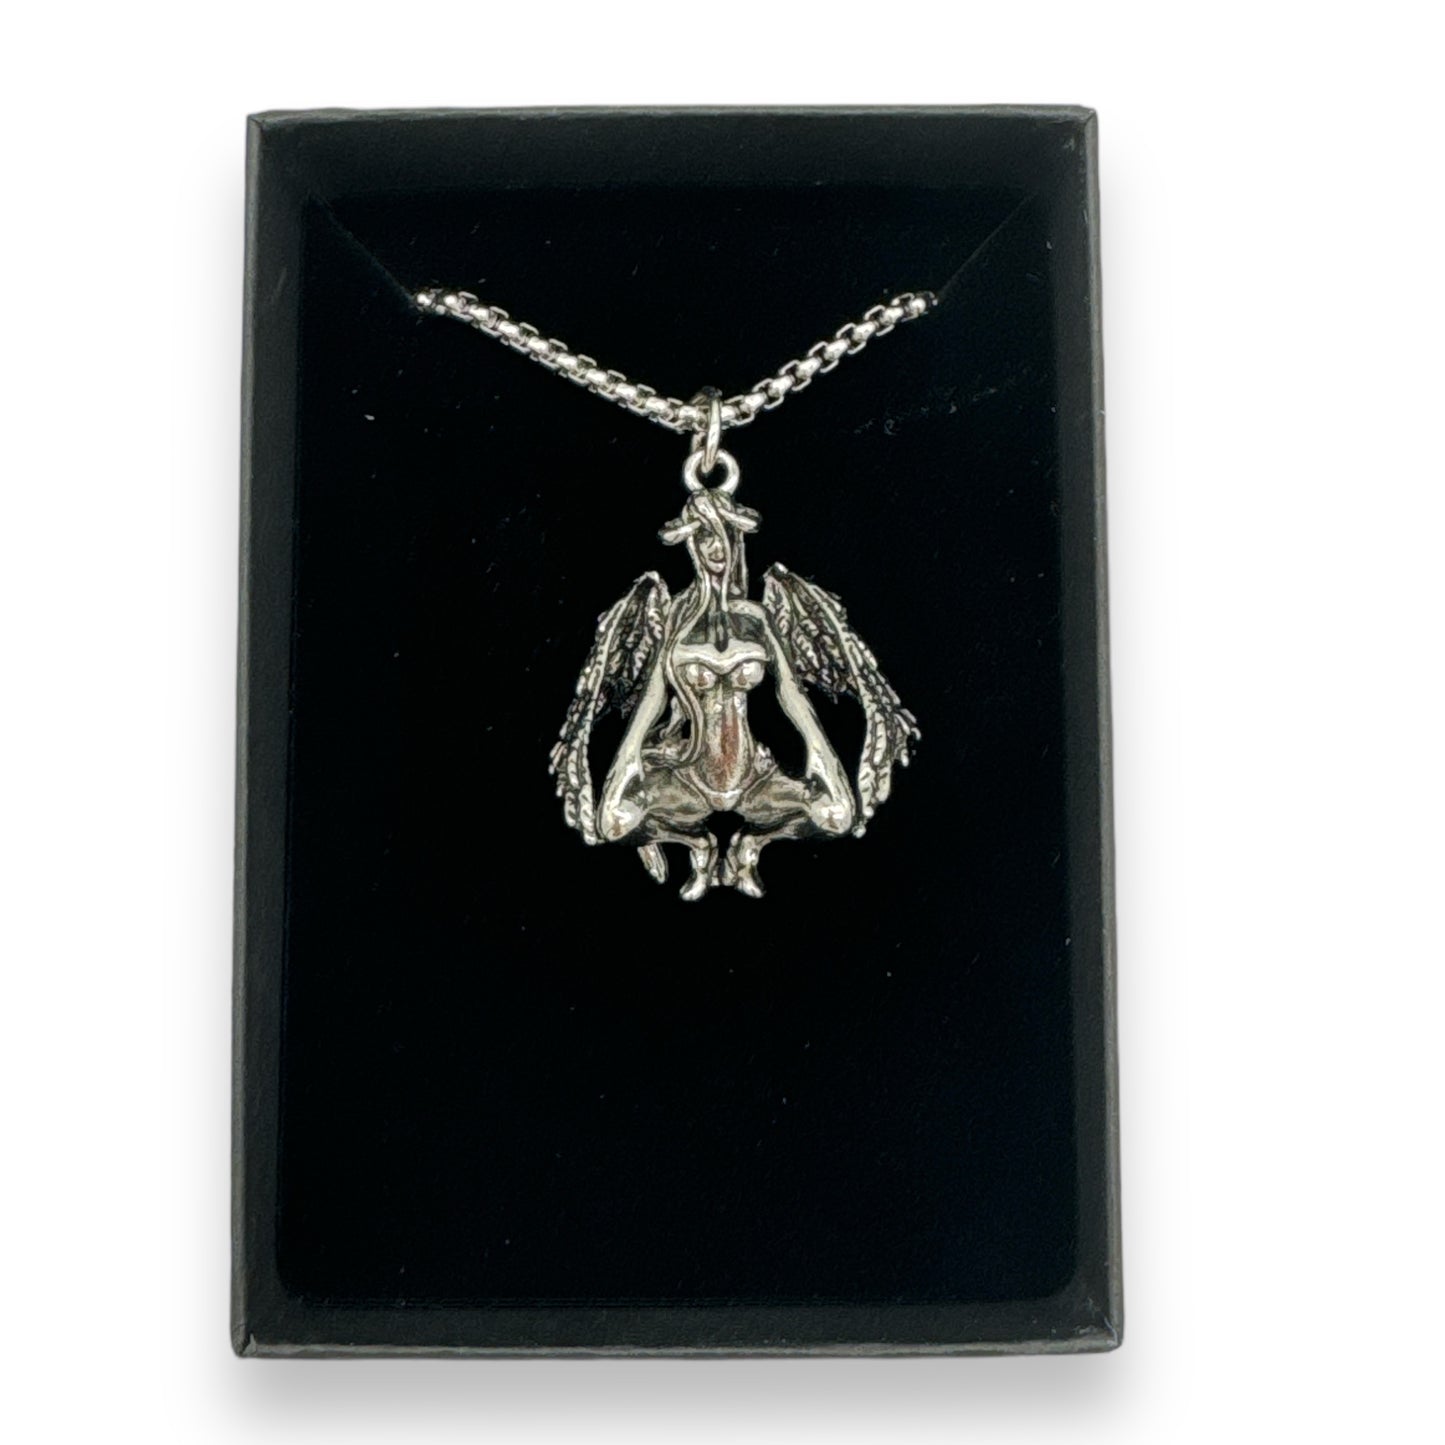 Exclusive Necklace 'Sexy Demon Girl' - An Enchanting Jewelry